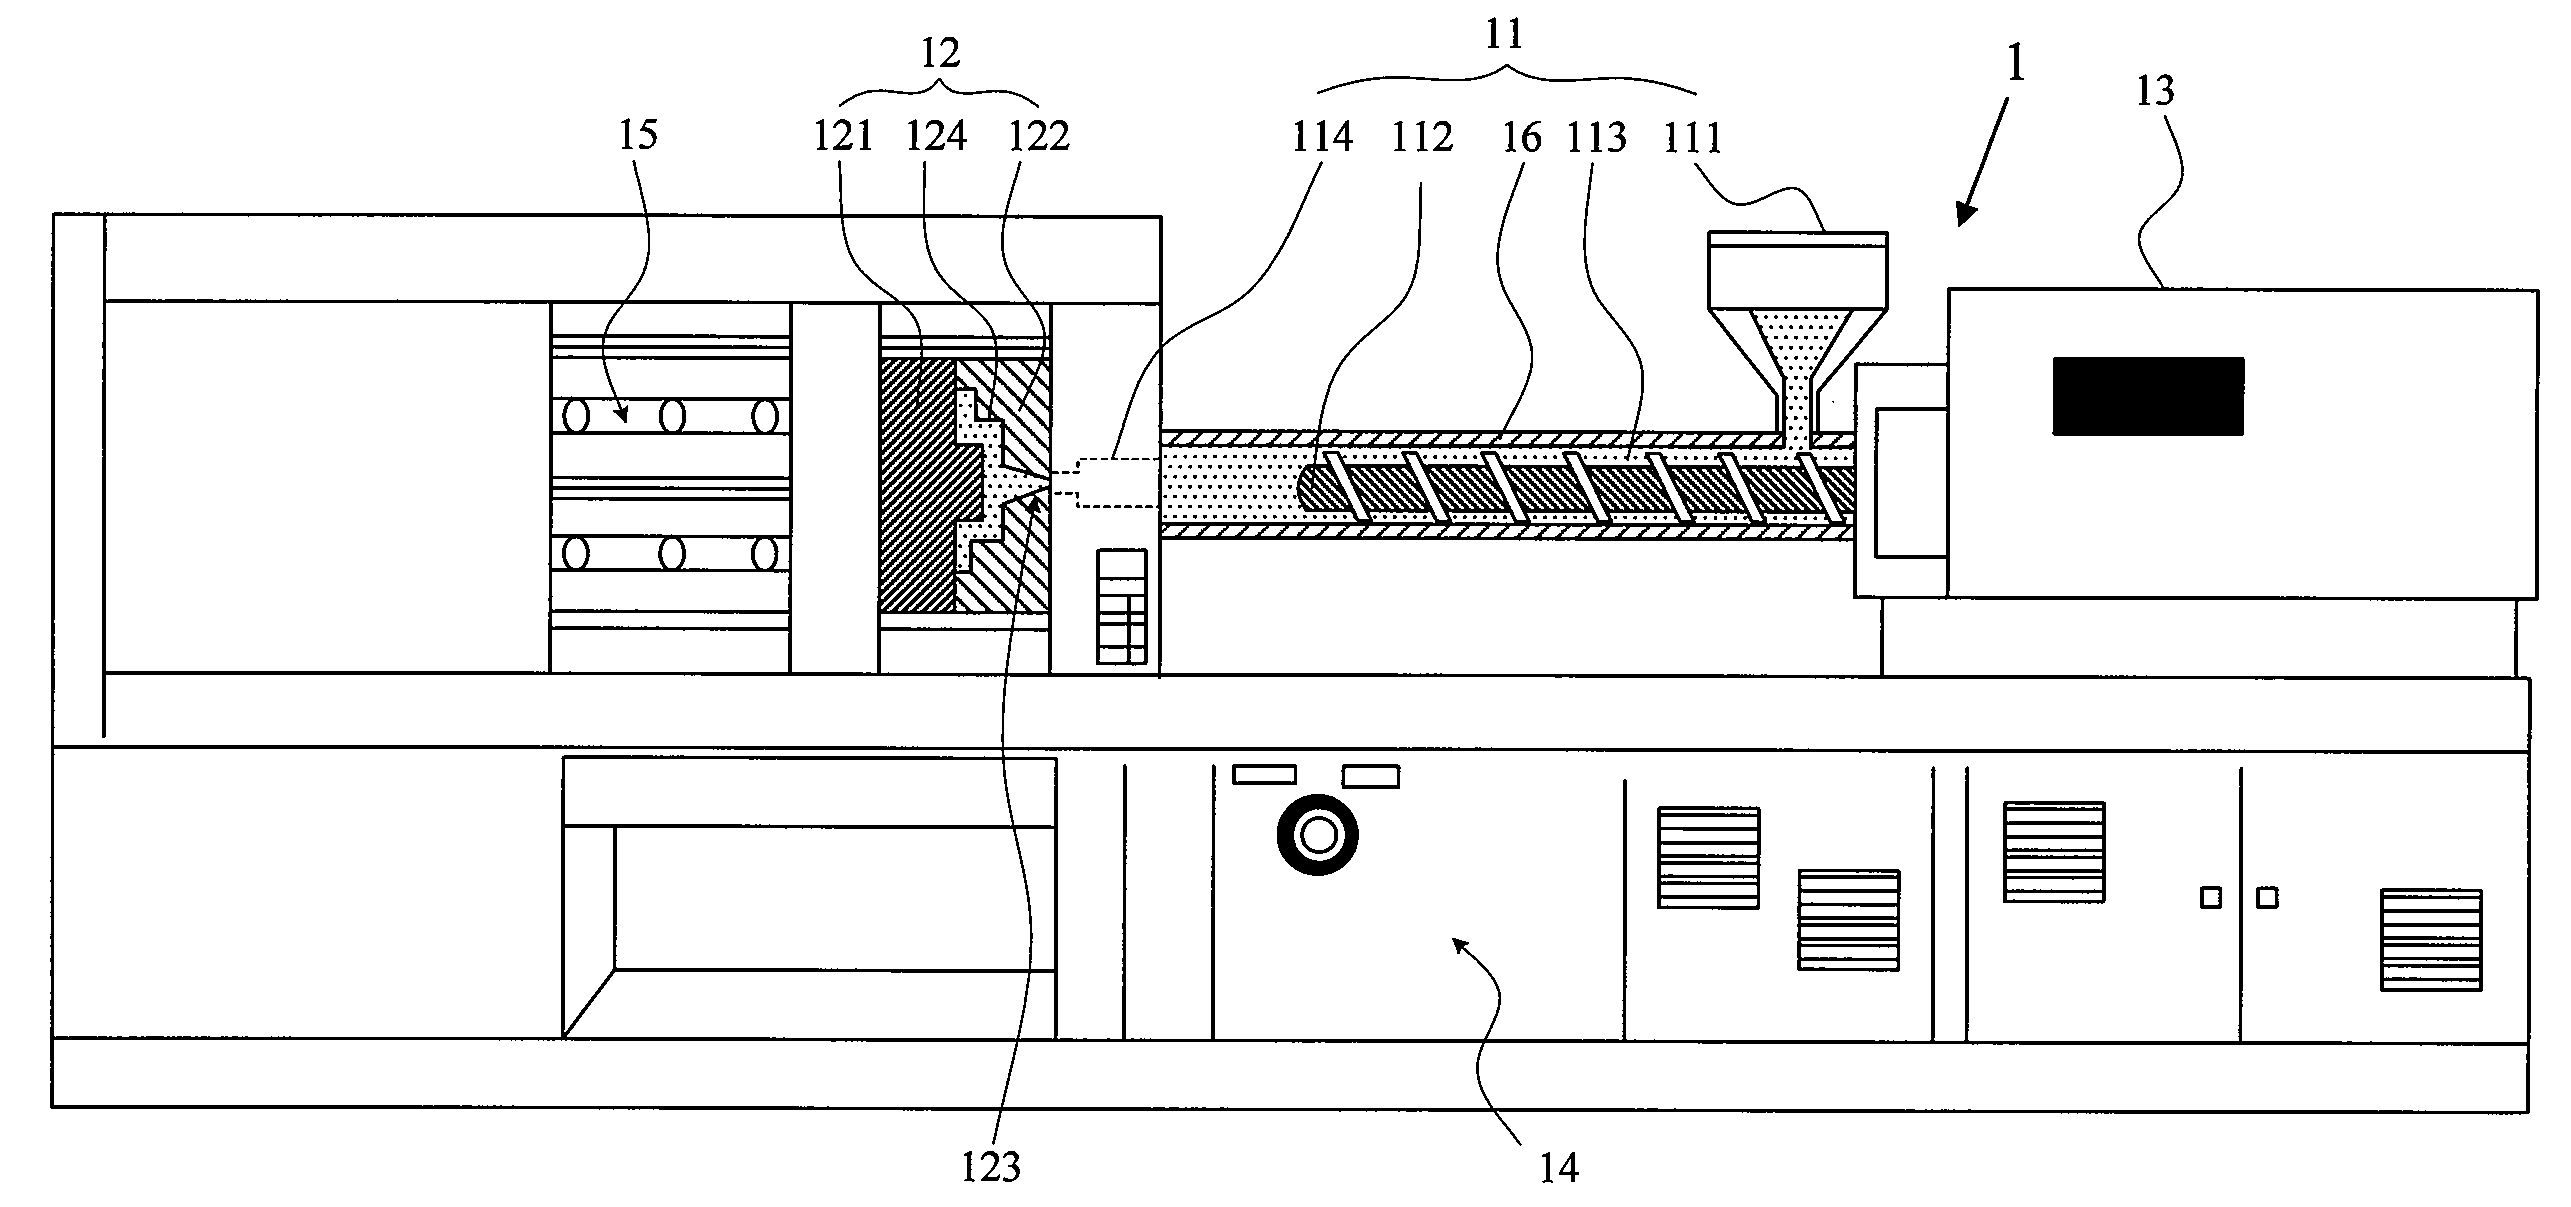 Injection molding machine having a heat insulated barrel